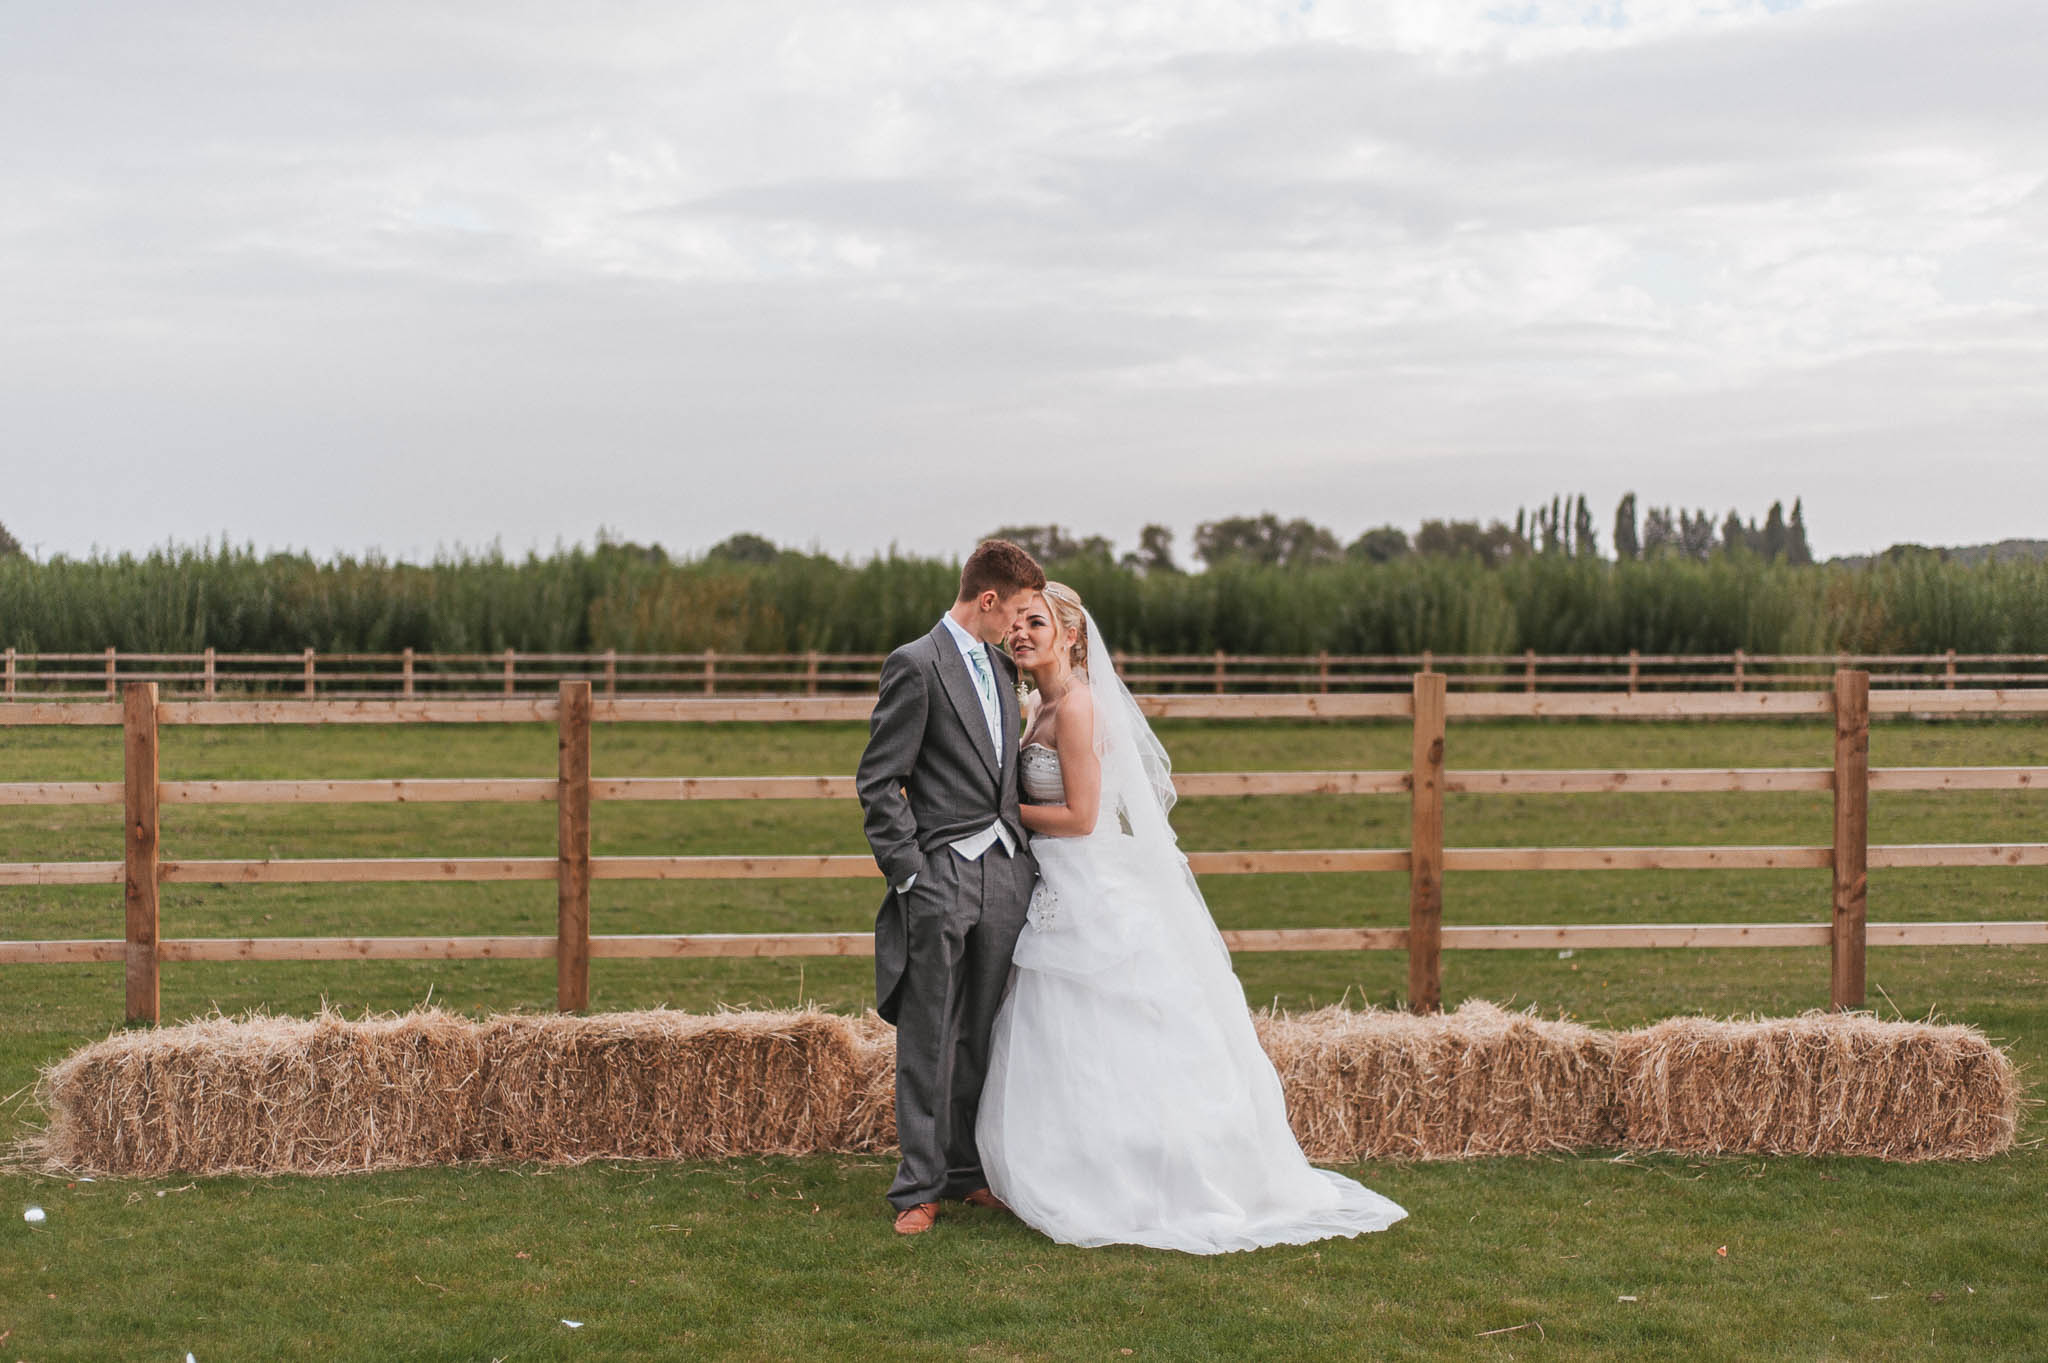 Corah and Luke’s wedding at Norton Common Farm in Doncaster